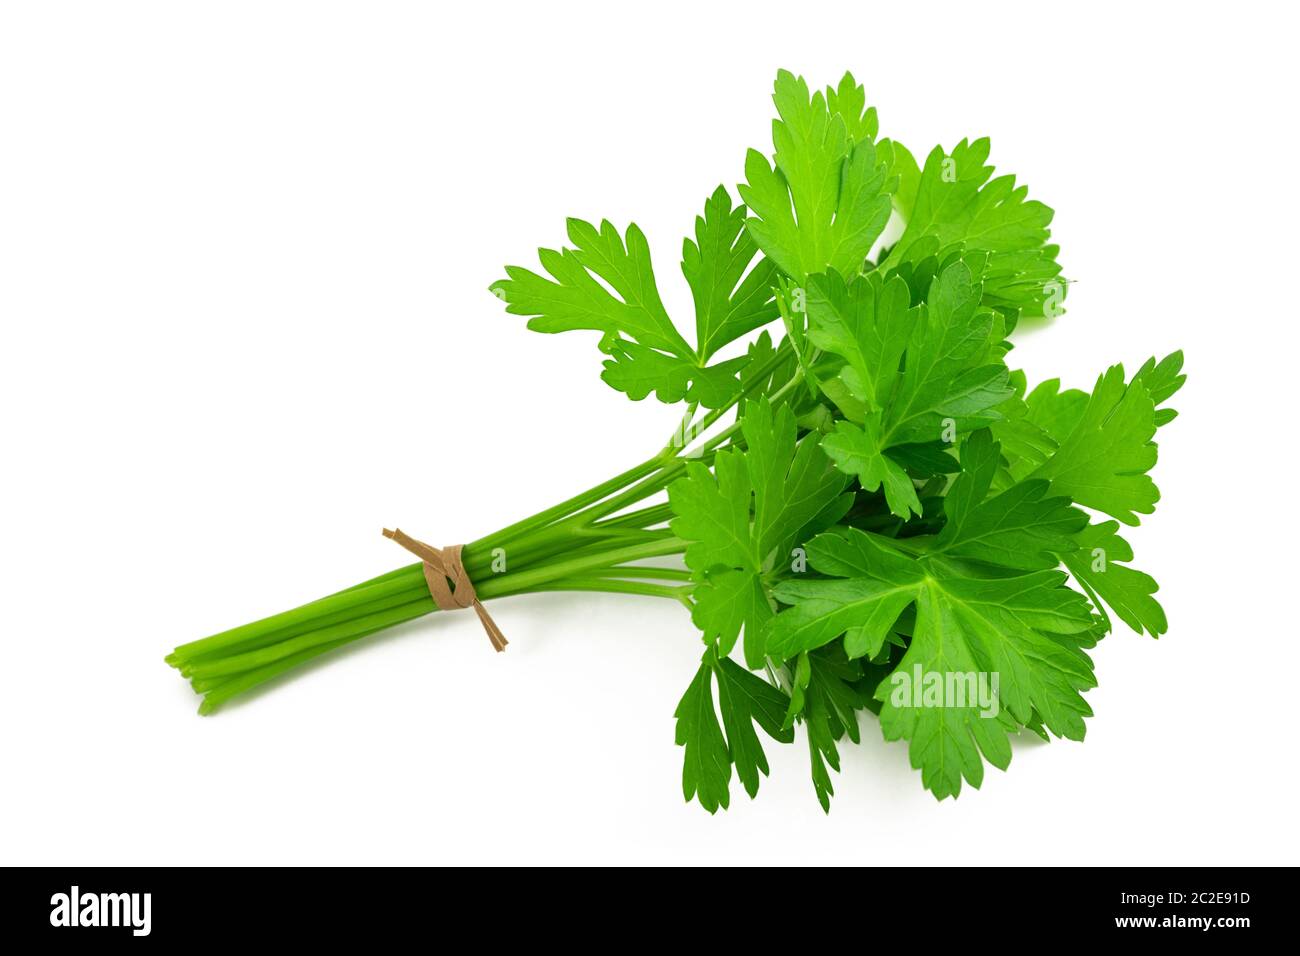 Parsley bunch tied isolated on white background Stock Photo